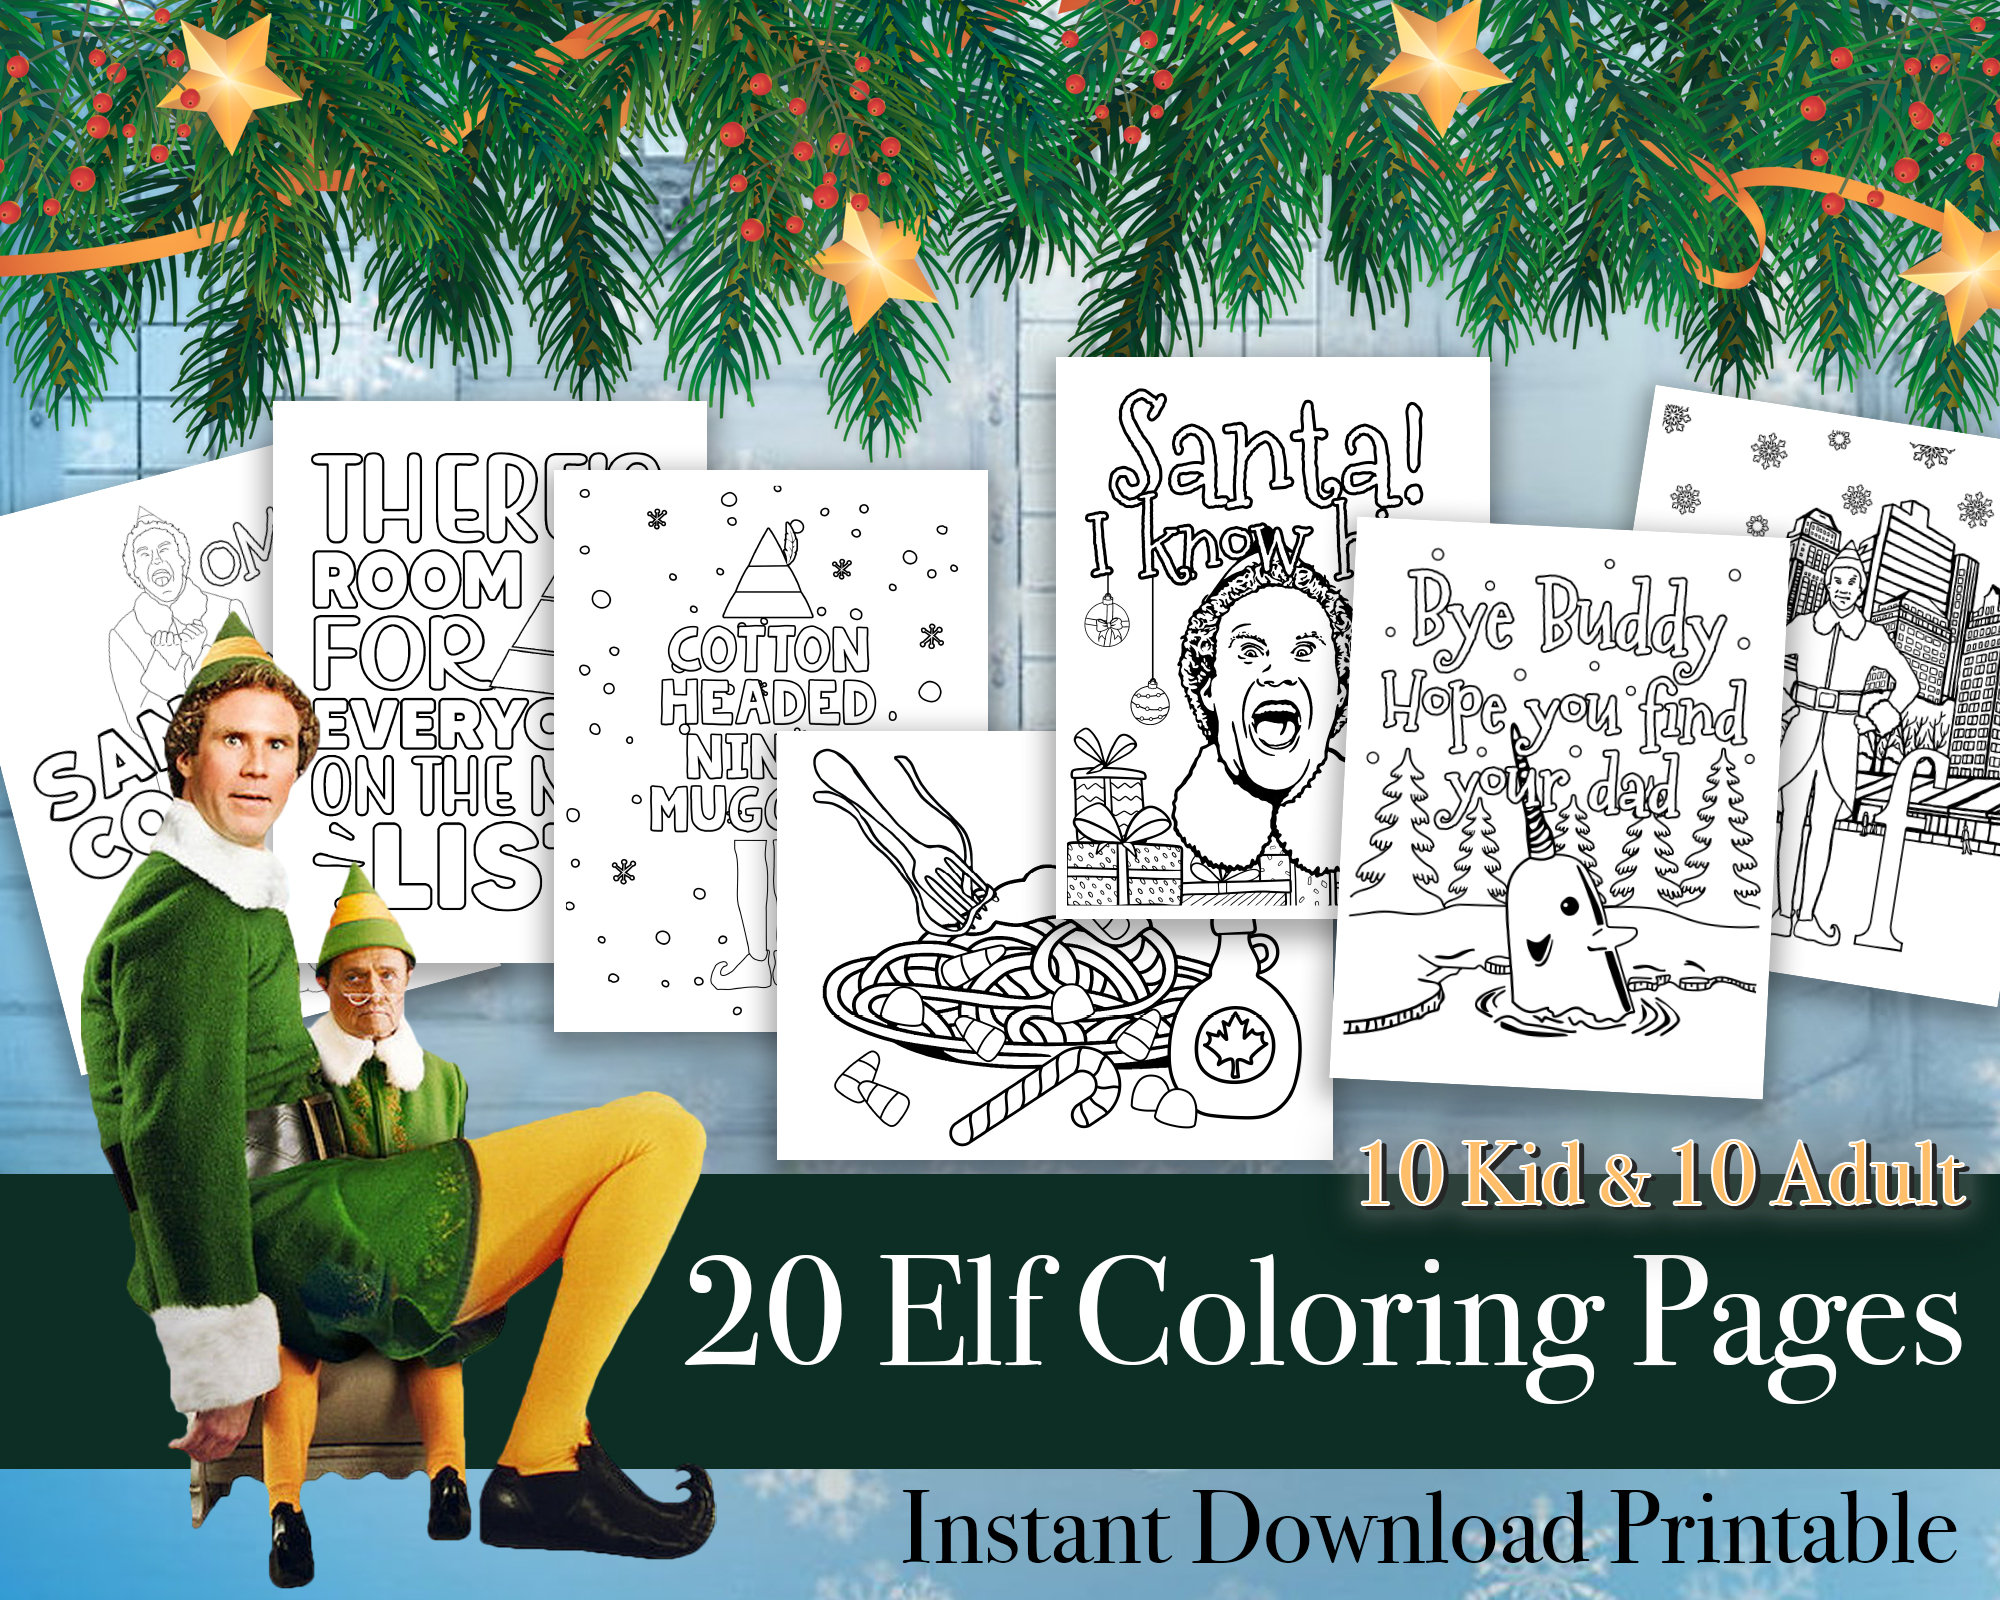 Elf christmas coloring pages printable elf coloring page bundle buddy the elf quotes printable christmas coloring pages for kids adults